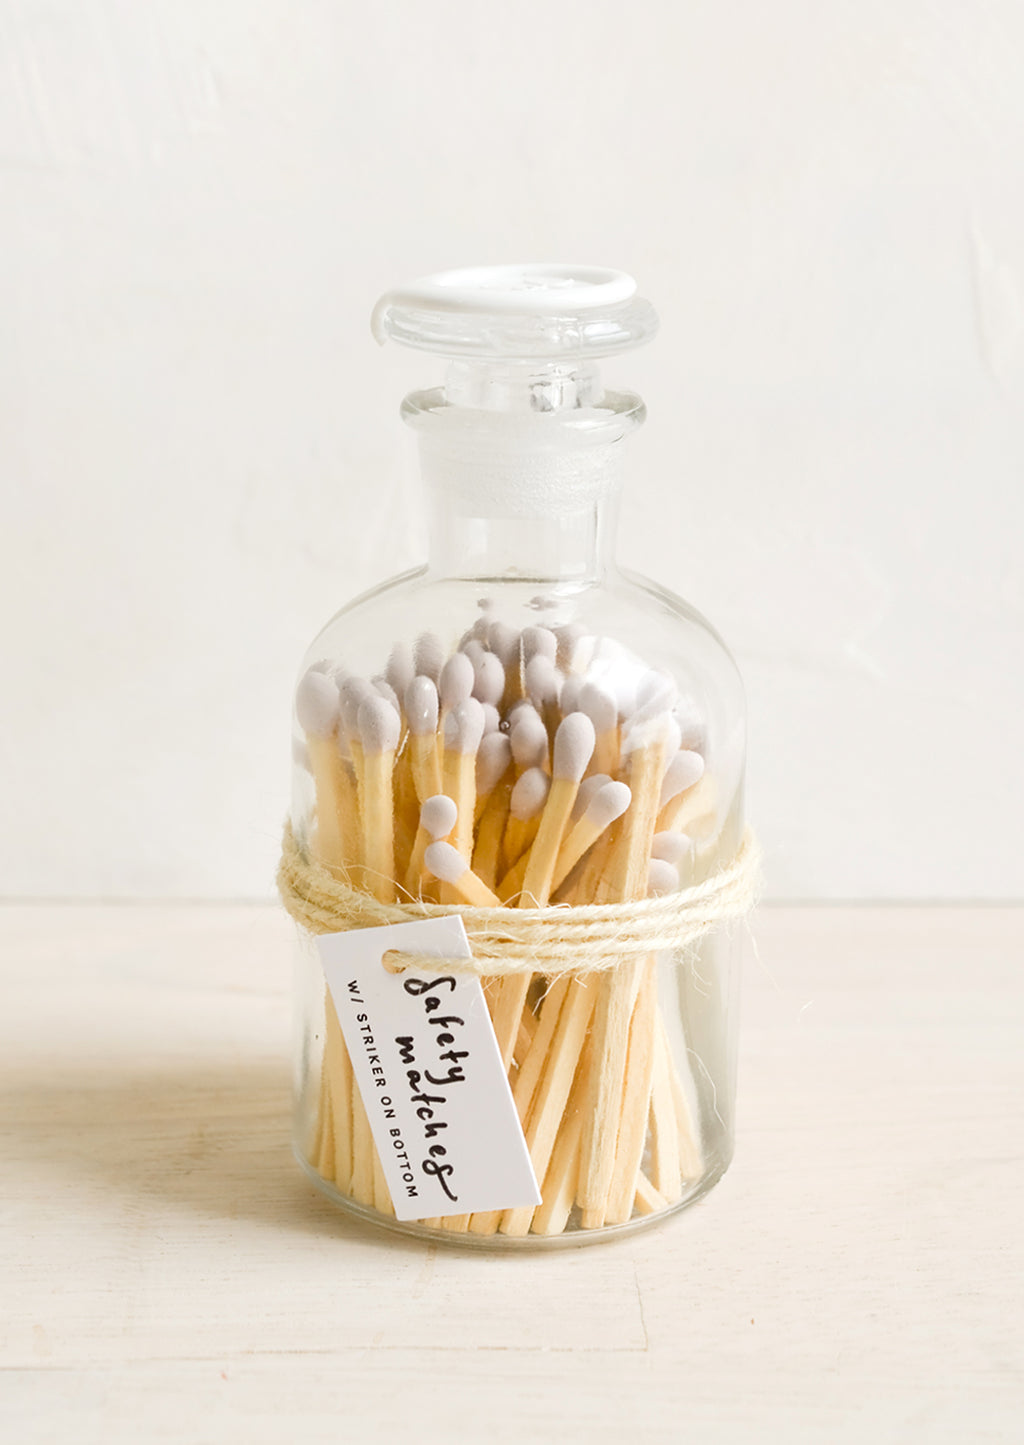 Lavender: Safety matches with lavender tips in a vintage-style glass apothecary jar with white wax seal on lid.